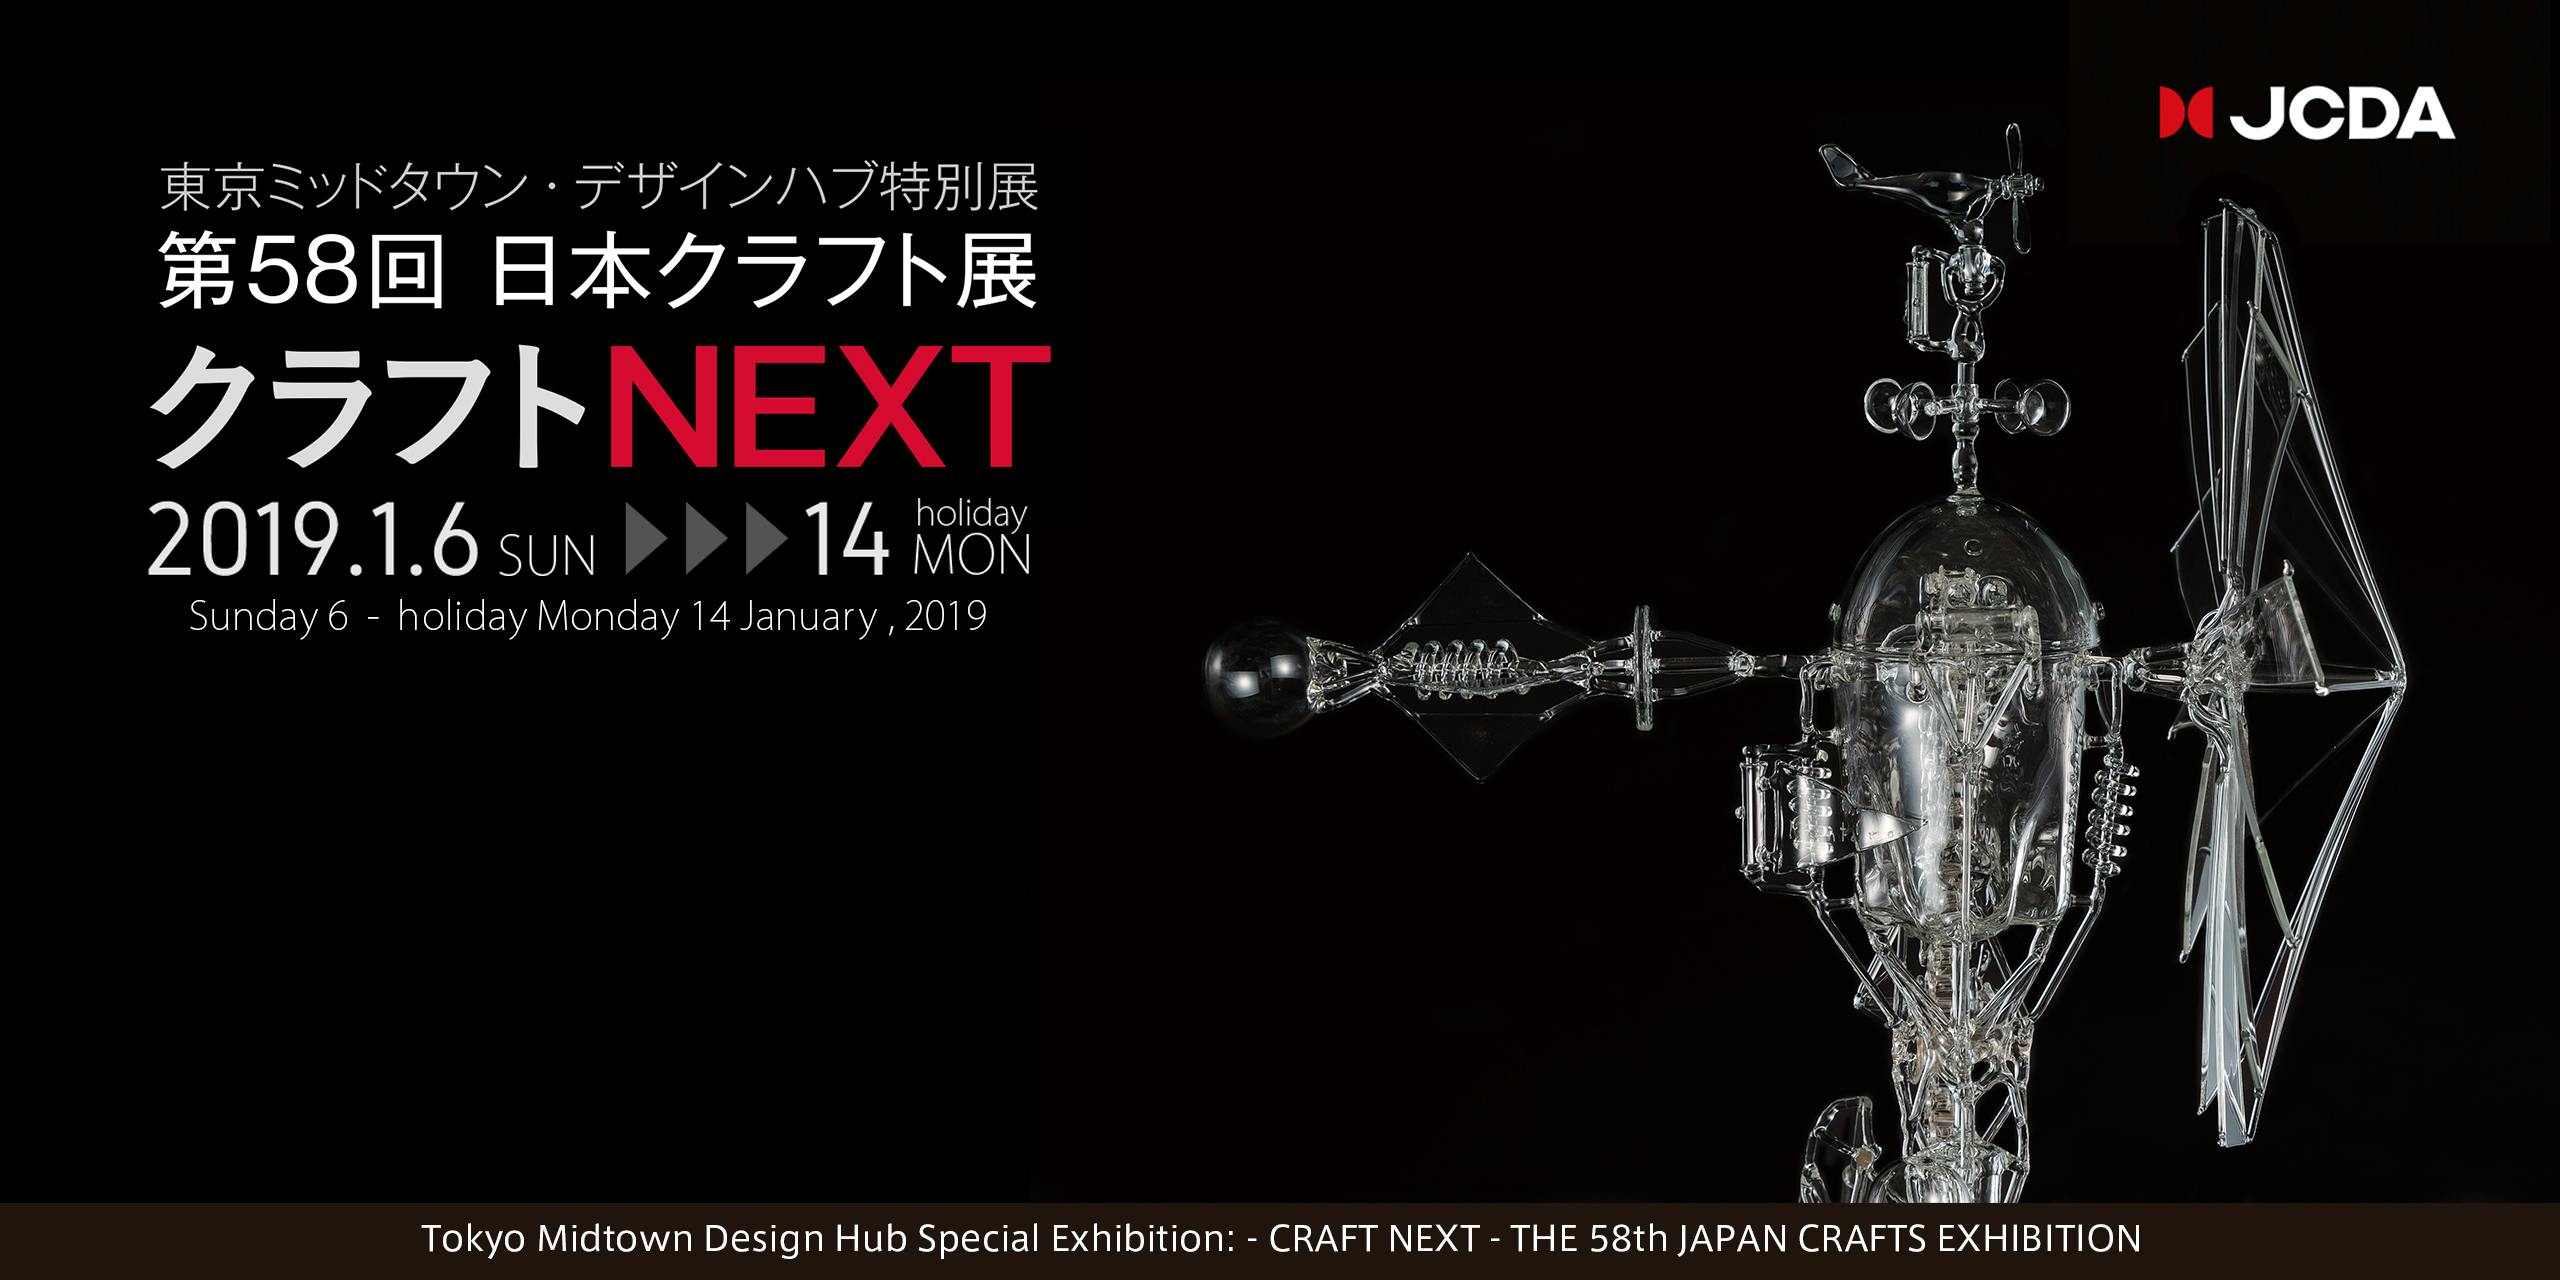 - CRAFT NEXT - THE 58th JAPAN CRAFTS EXHIBITION